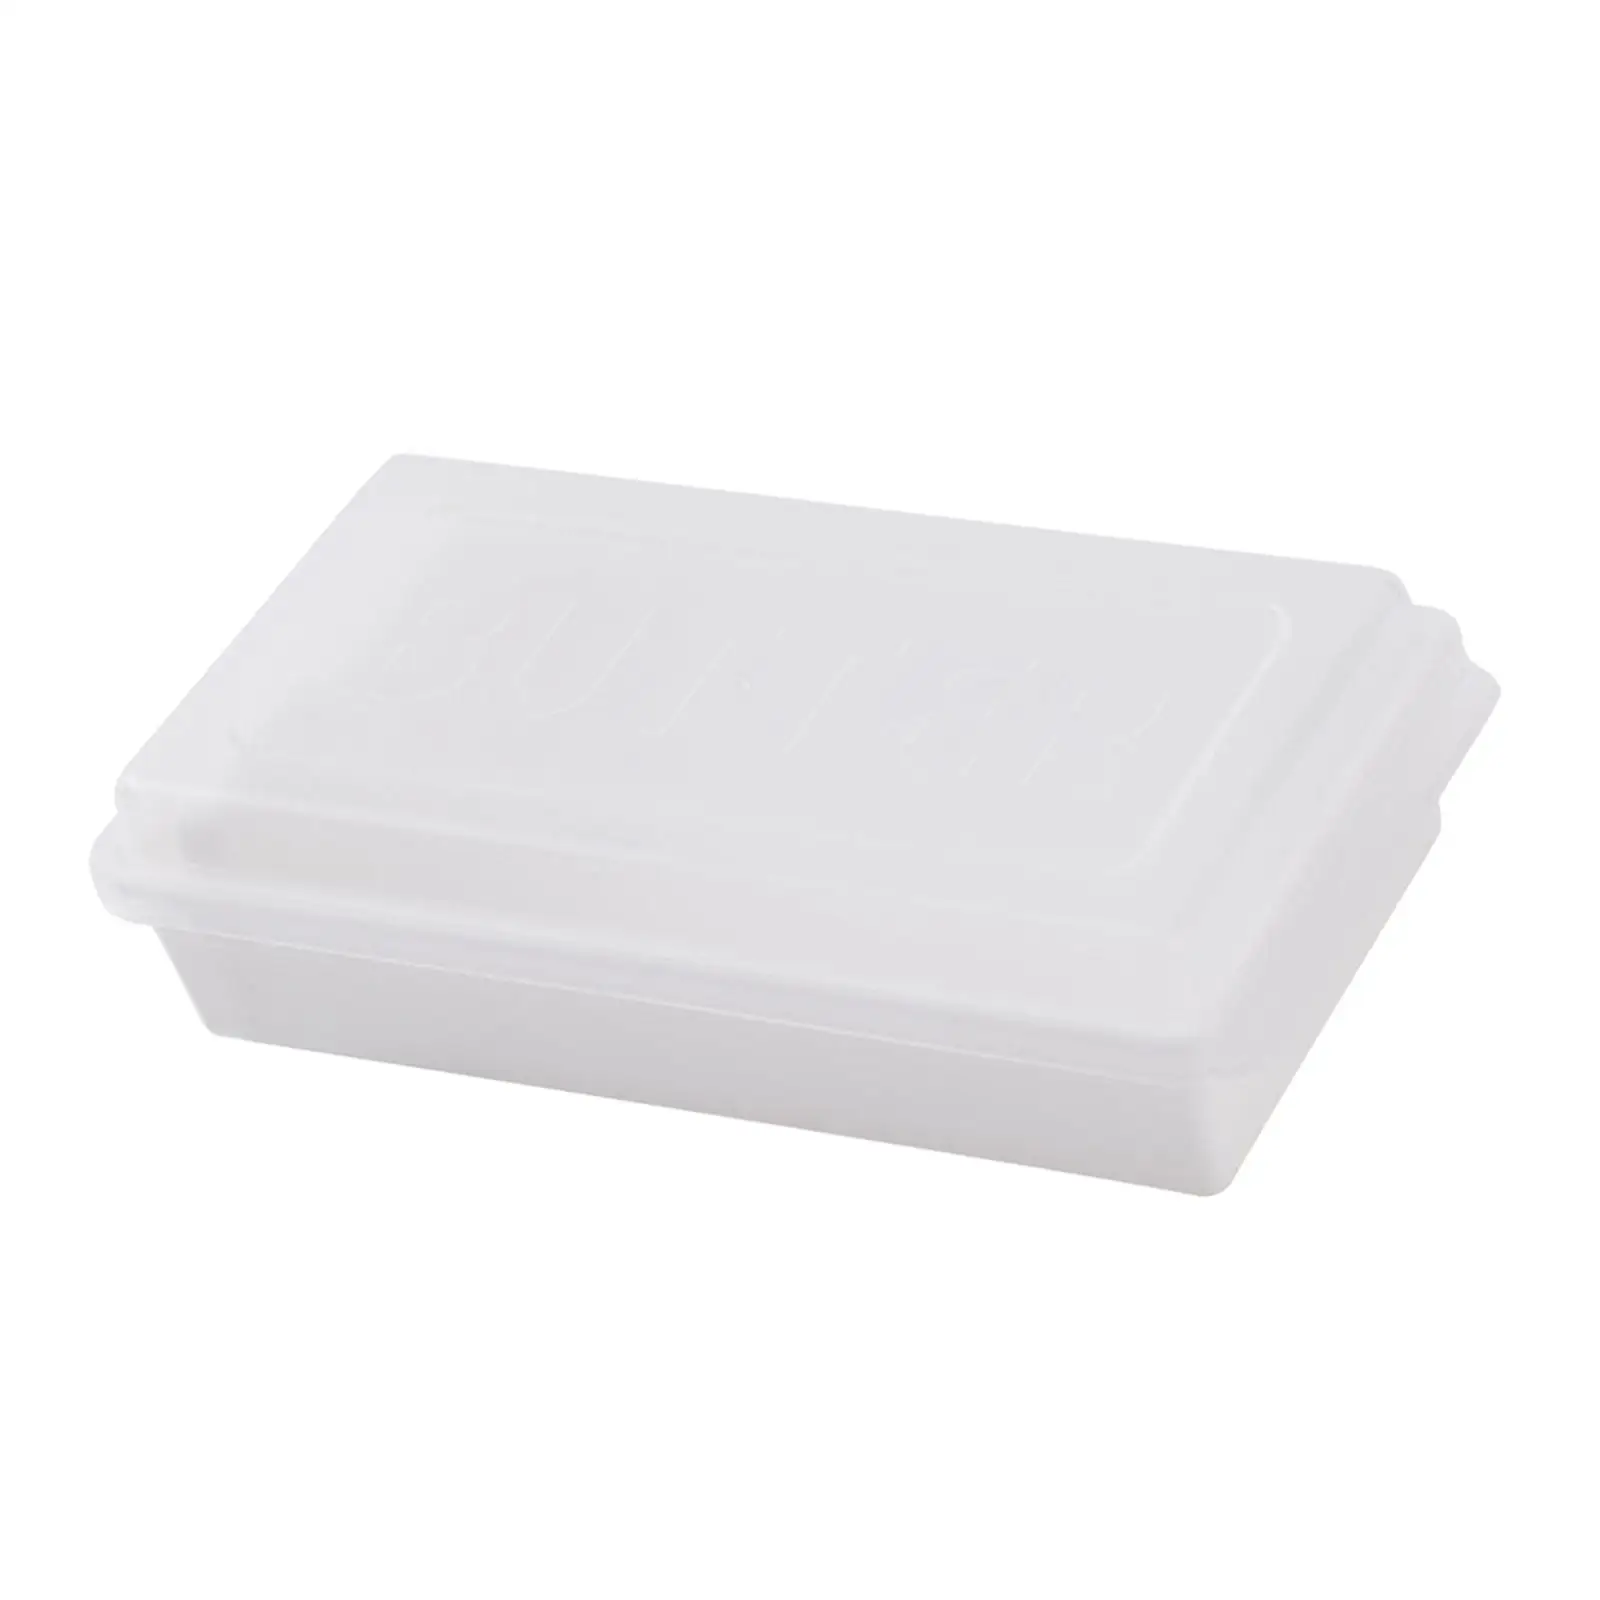 Butter with Lid Butter Cutting Storage Box for Fridge Dining